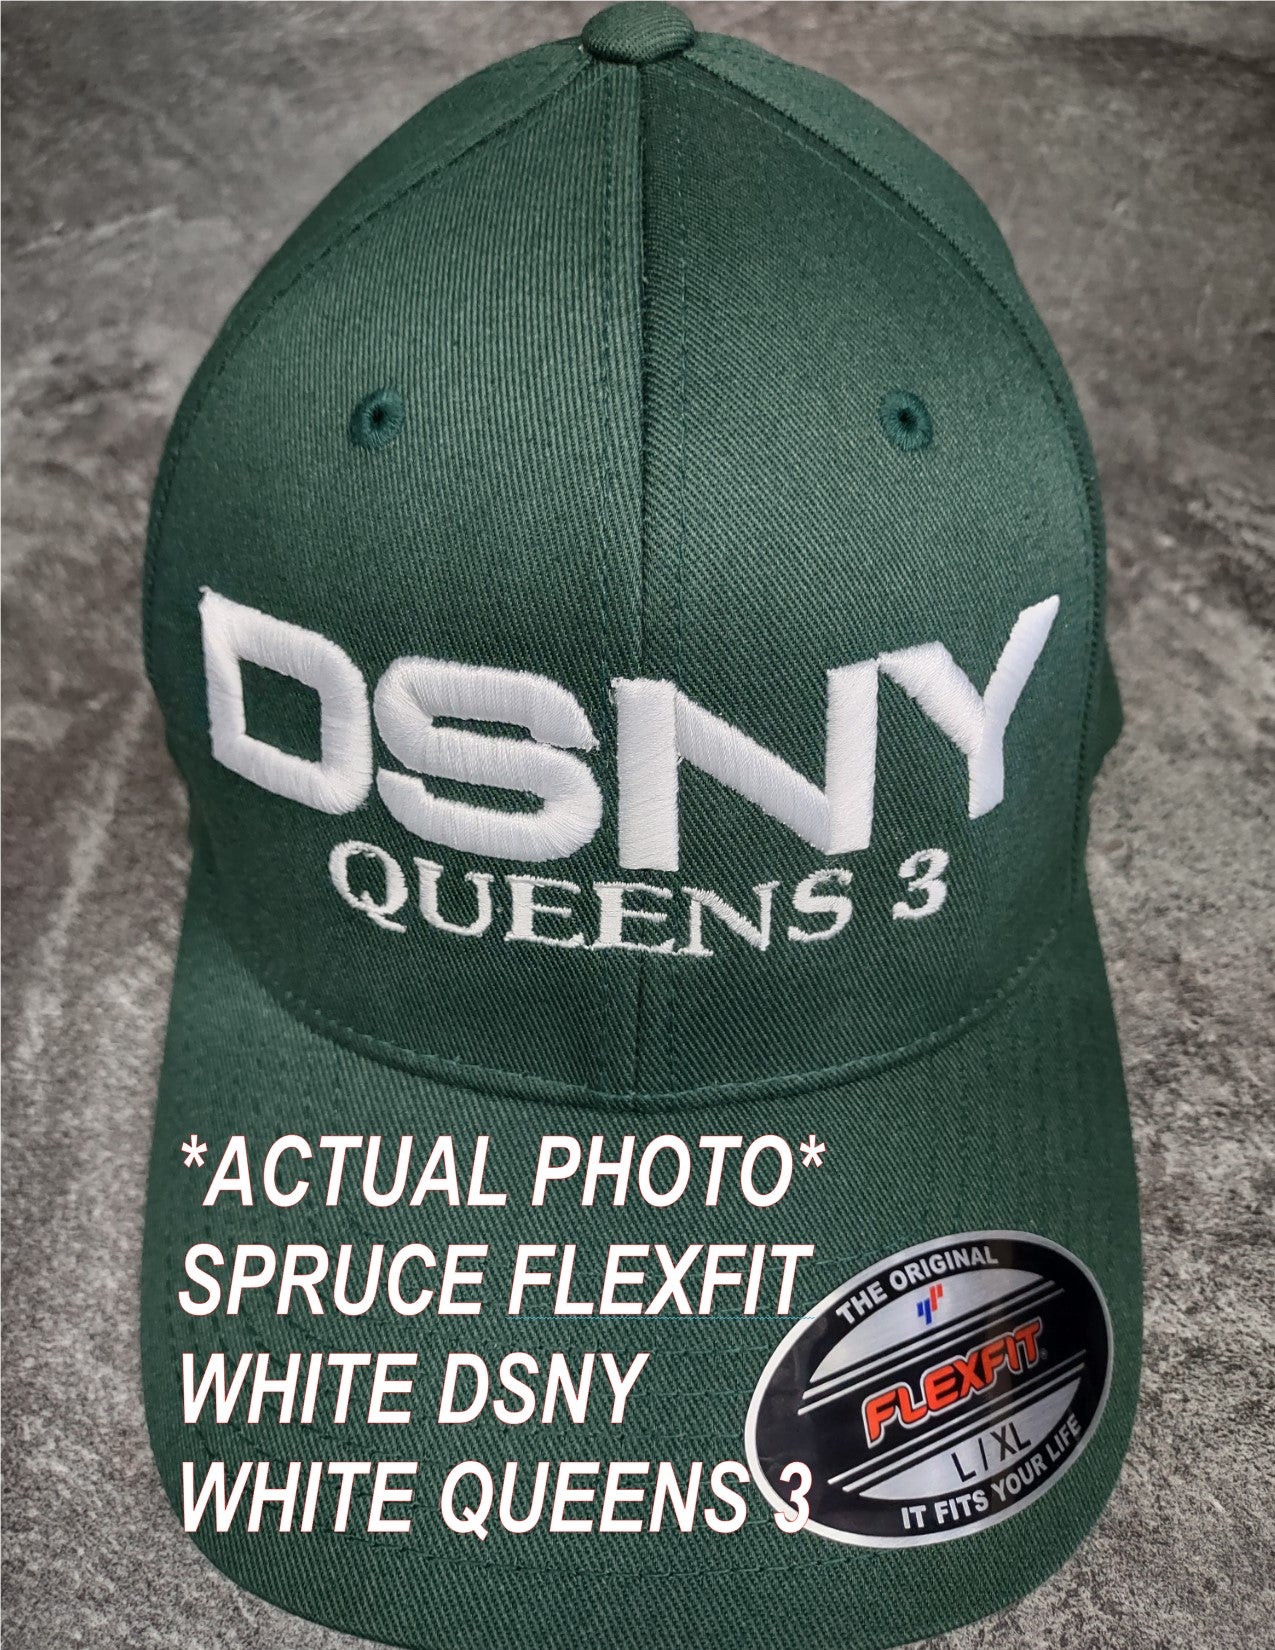 DSNY PUFF Embroidered Snapback or number Ruffino Hat with Fit your Customs Flex garage Apparel –